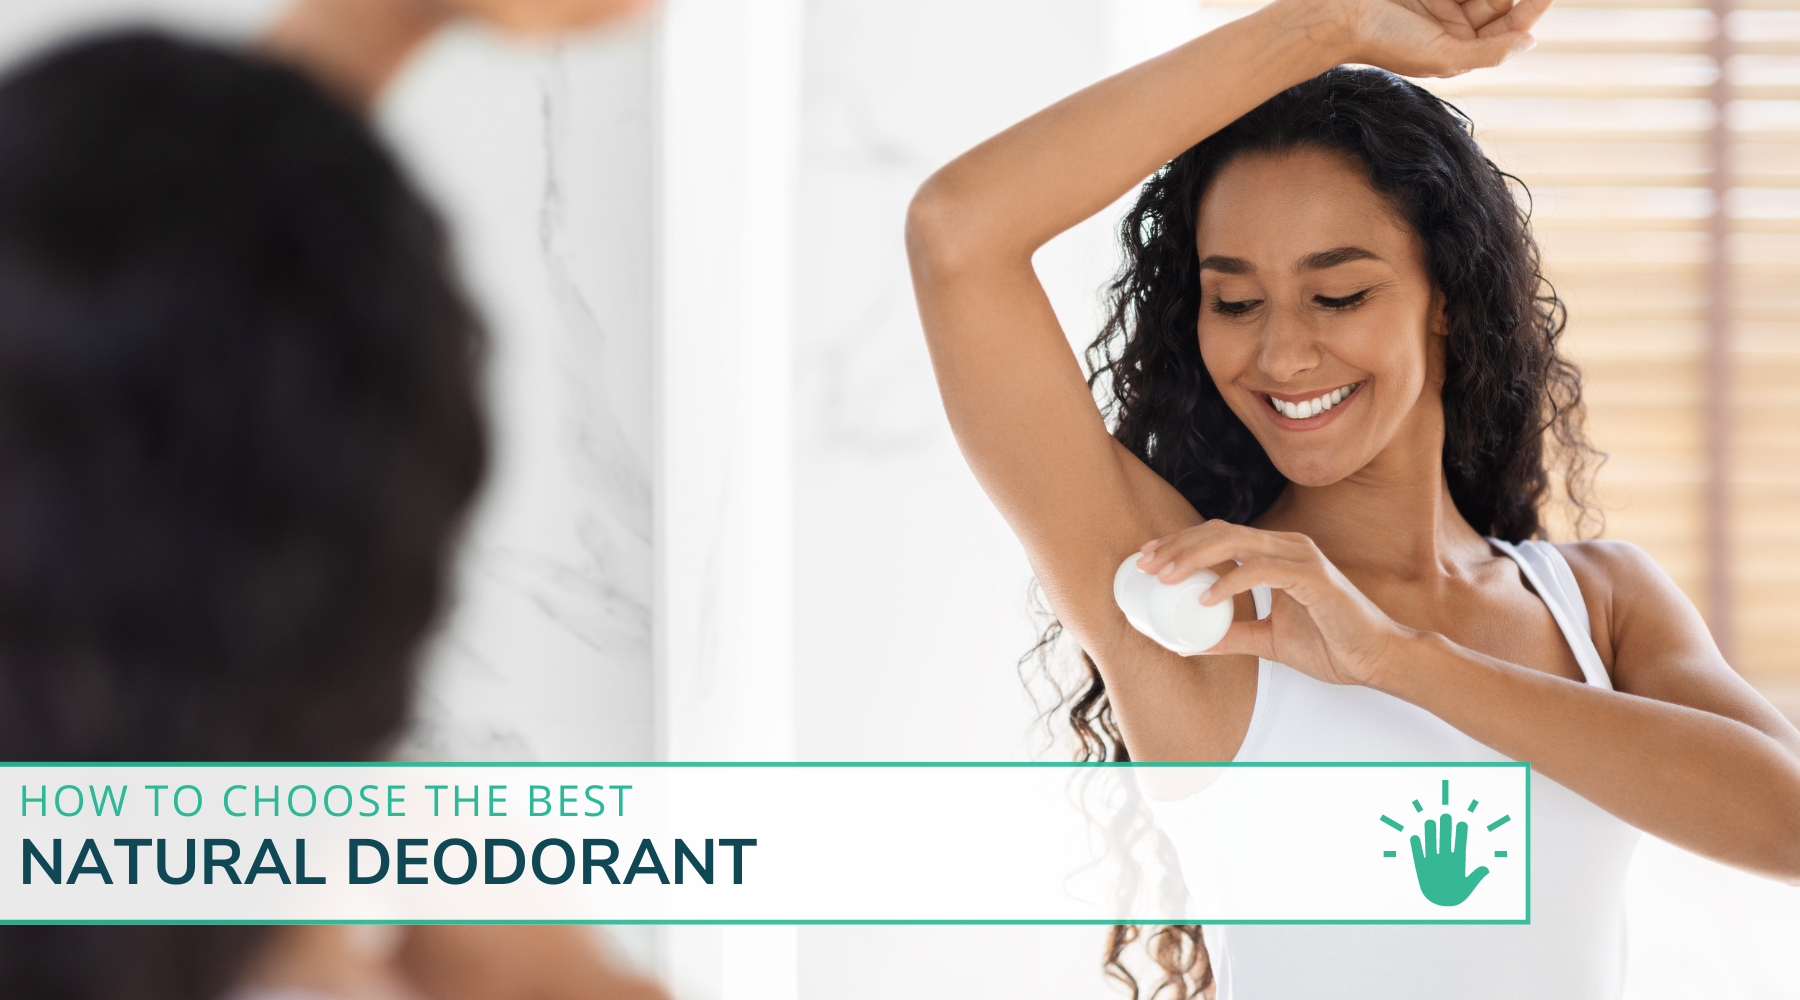 How to Choose the Best Natural Deodorant